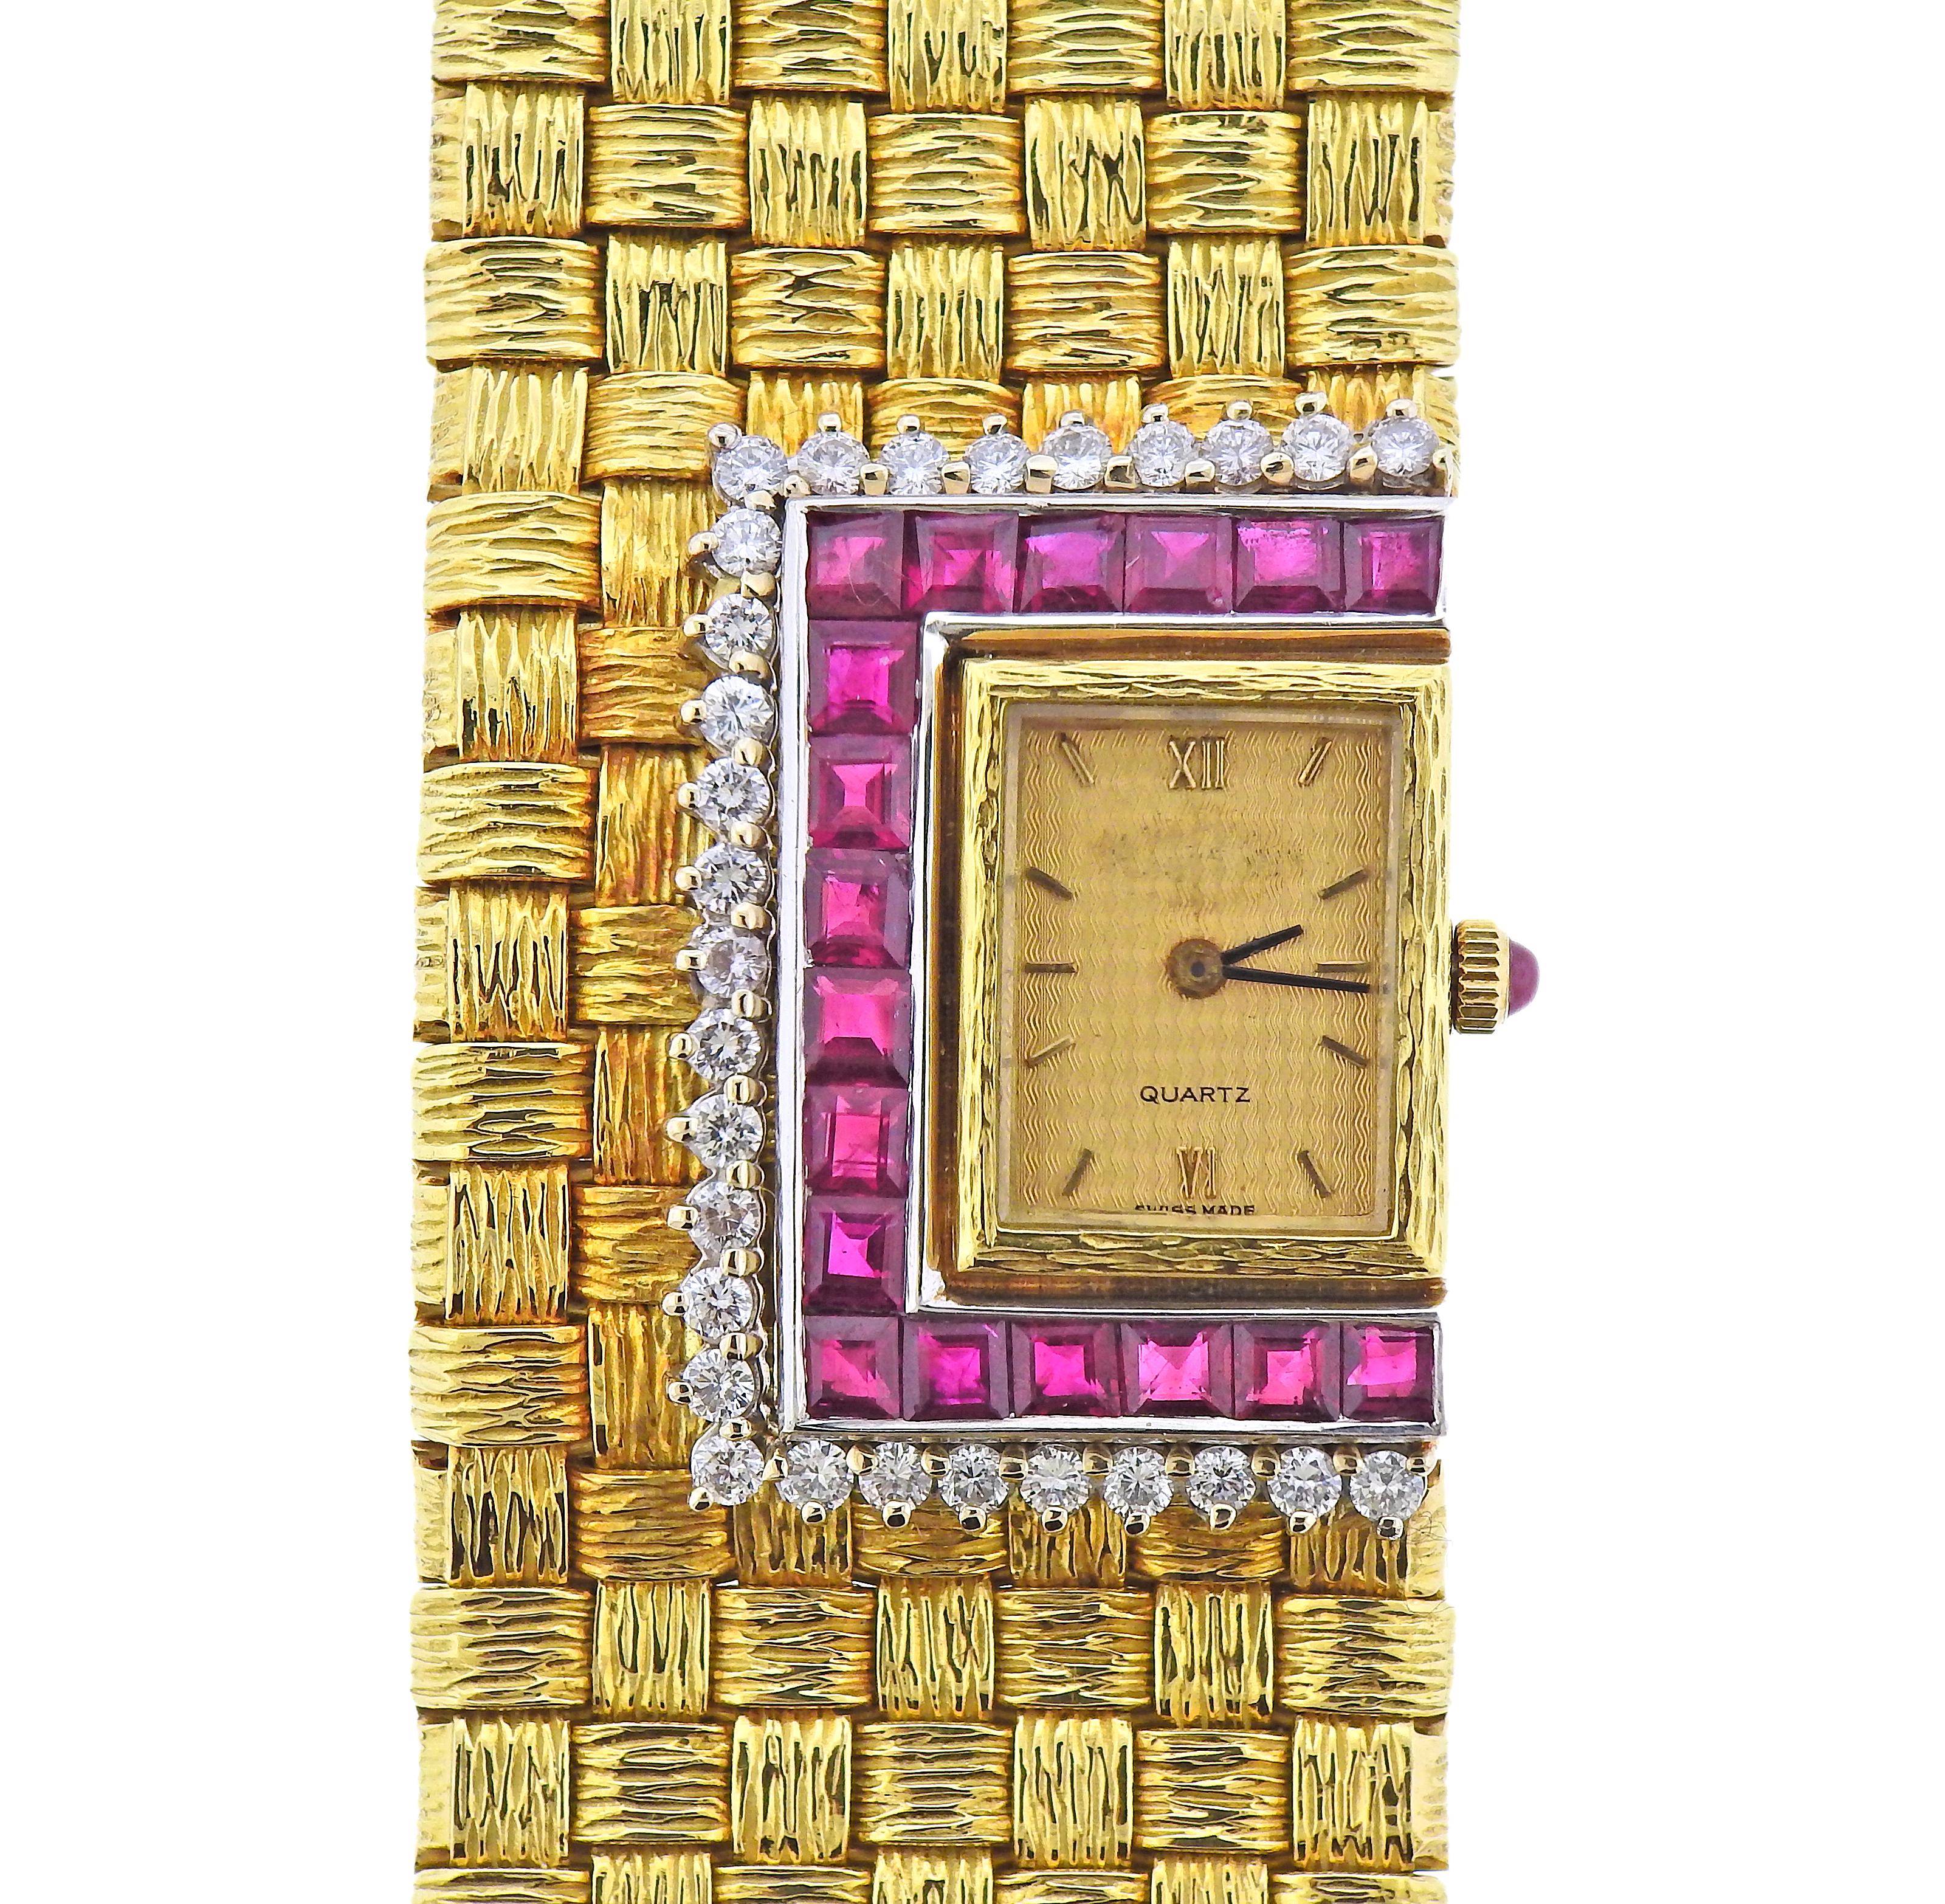 18k yellow gold woven bracelet watch, decorated with rubies and approx. 1.16ctw in diamonds. Bracelet is 7.25